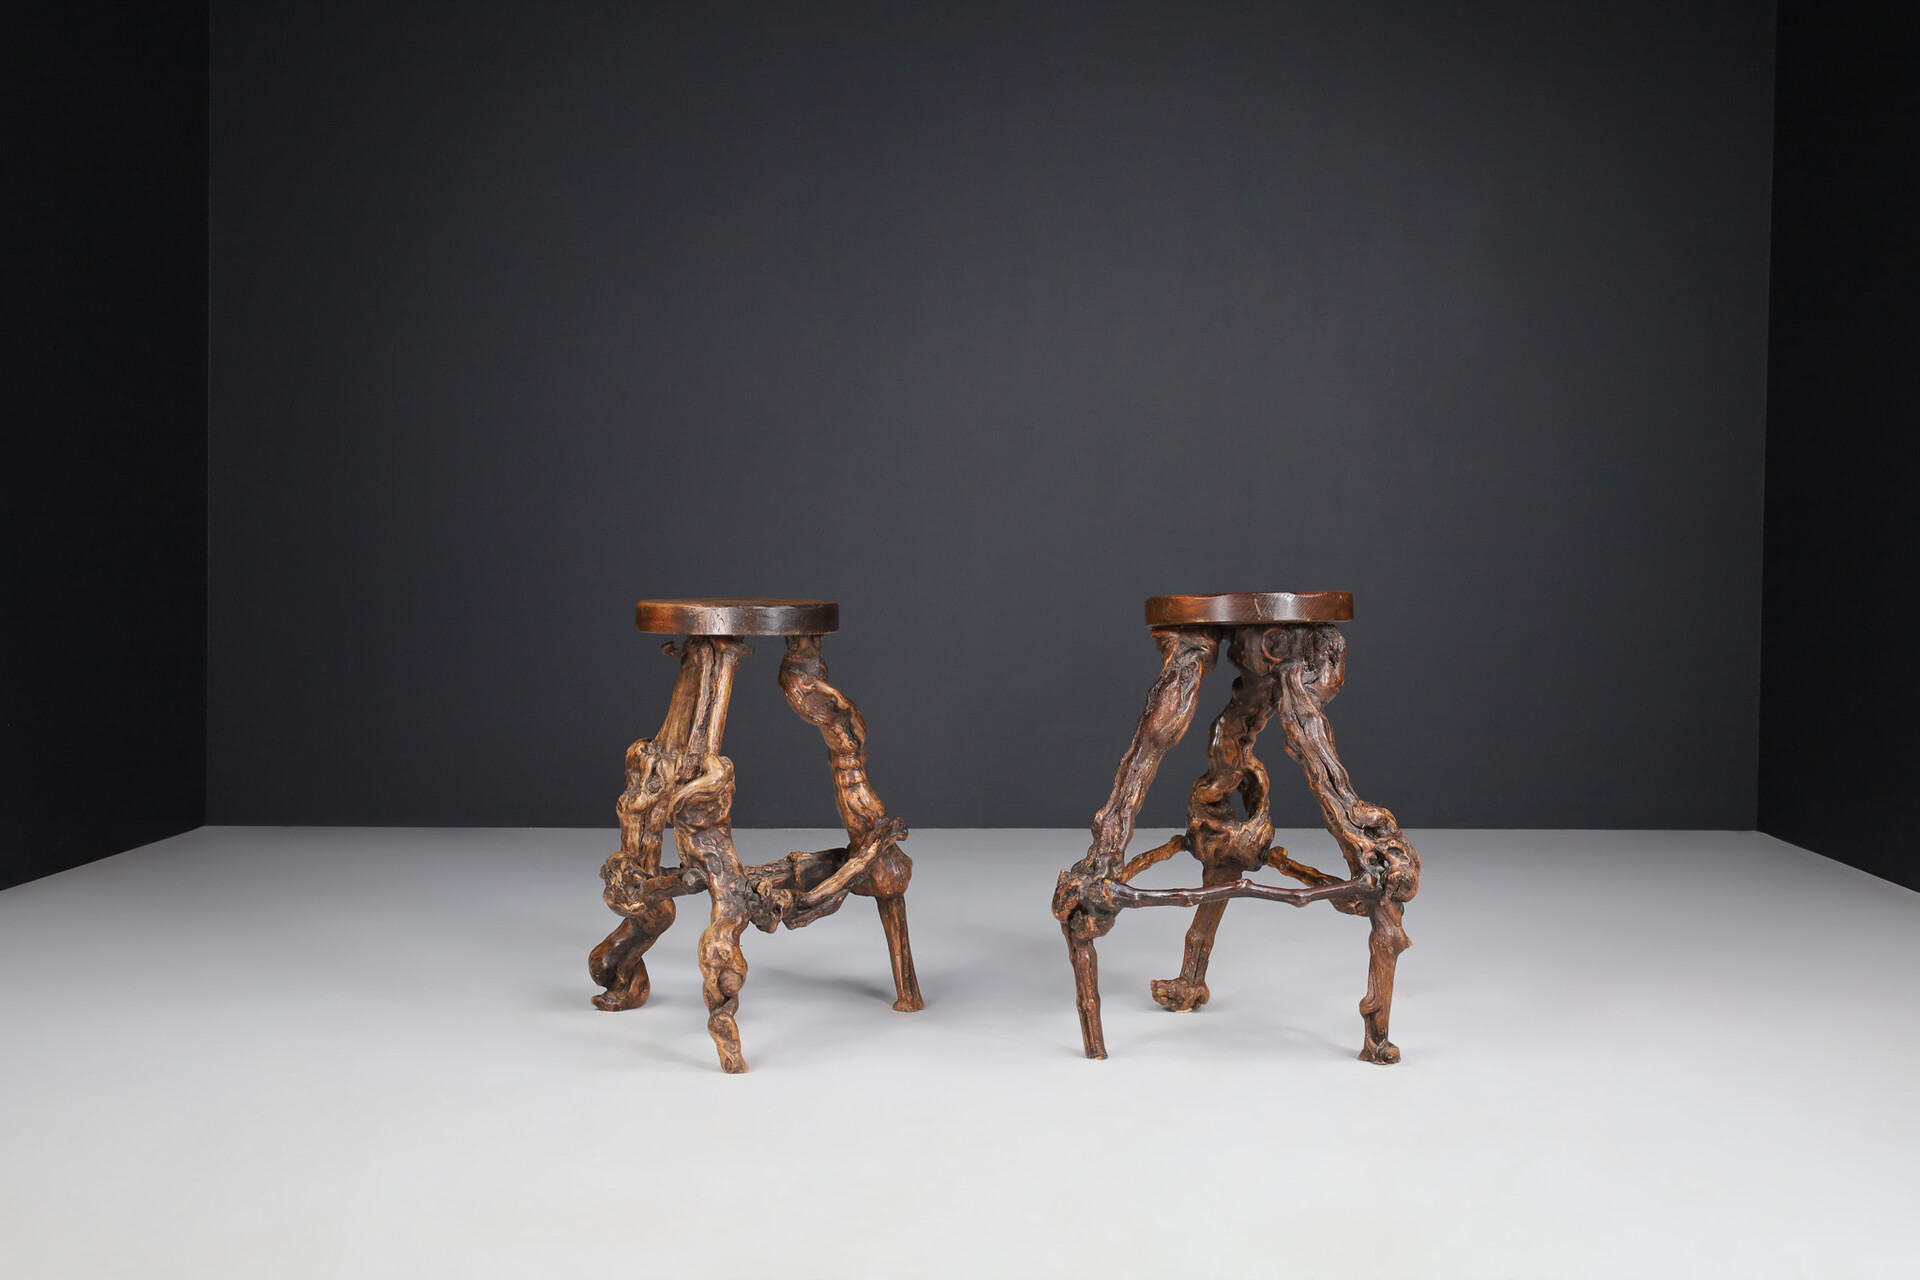 Art and craft Handcrafted Grapevine Root Stools / side tables , France 1950s Mid-20th century